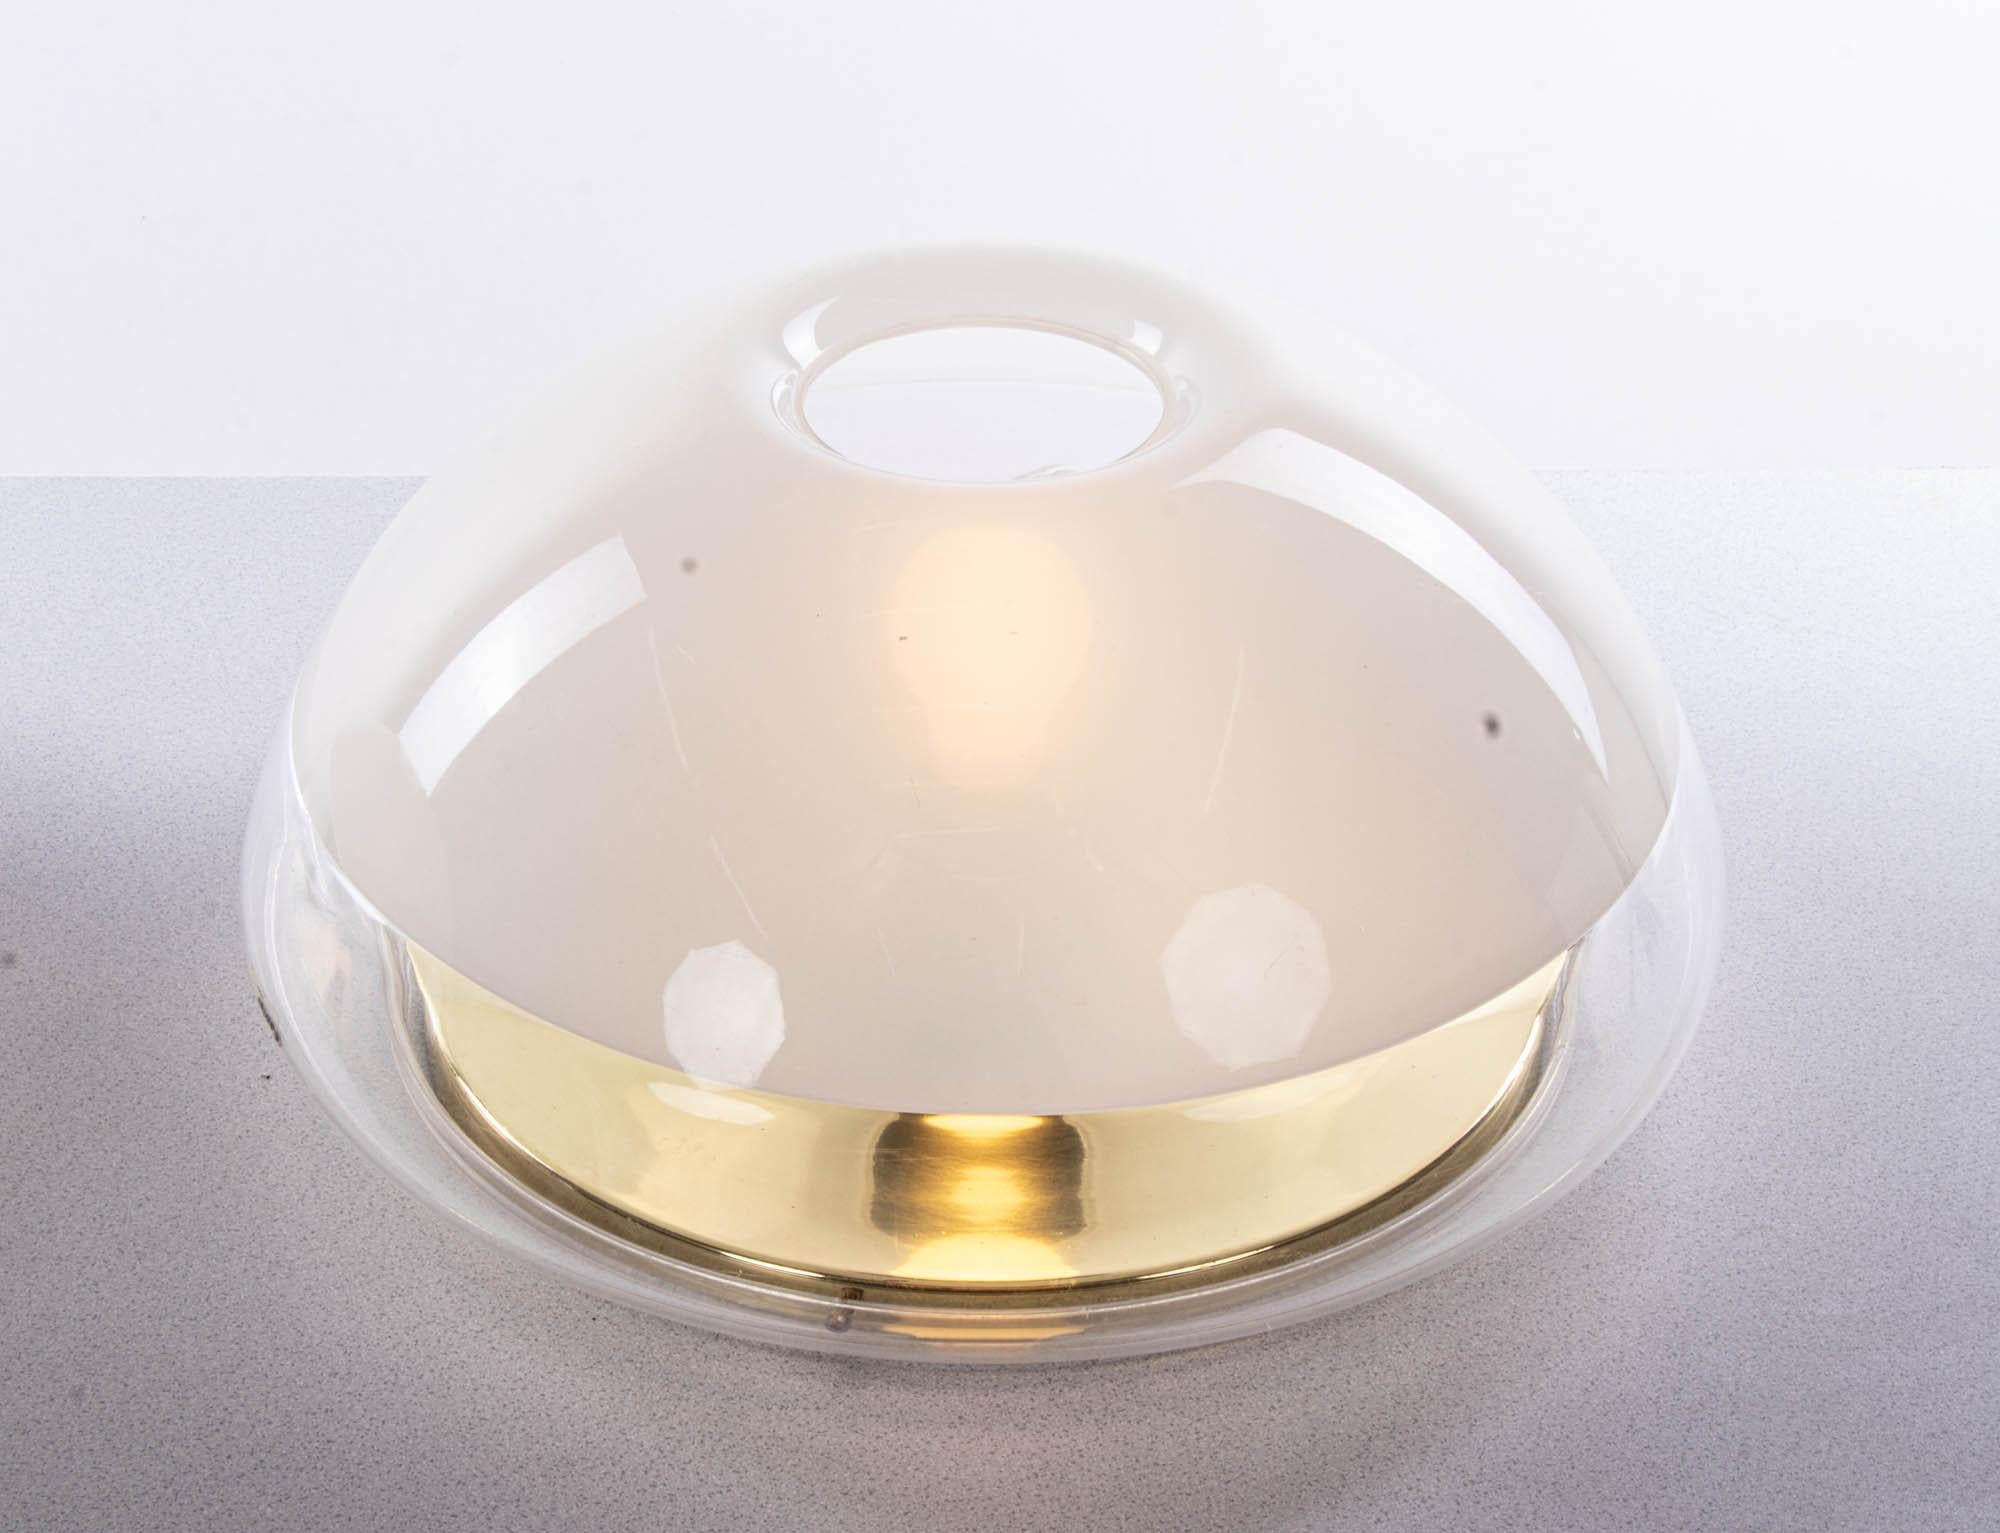 Elegant pair of space age wall and ceiling lights with white and clear plastic lampshades on a brass tulip frame. Designed and manufactured by iGuzzini, Italy in the 1970s. 

Measures: diameter 17.7